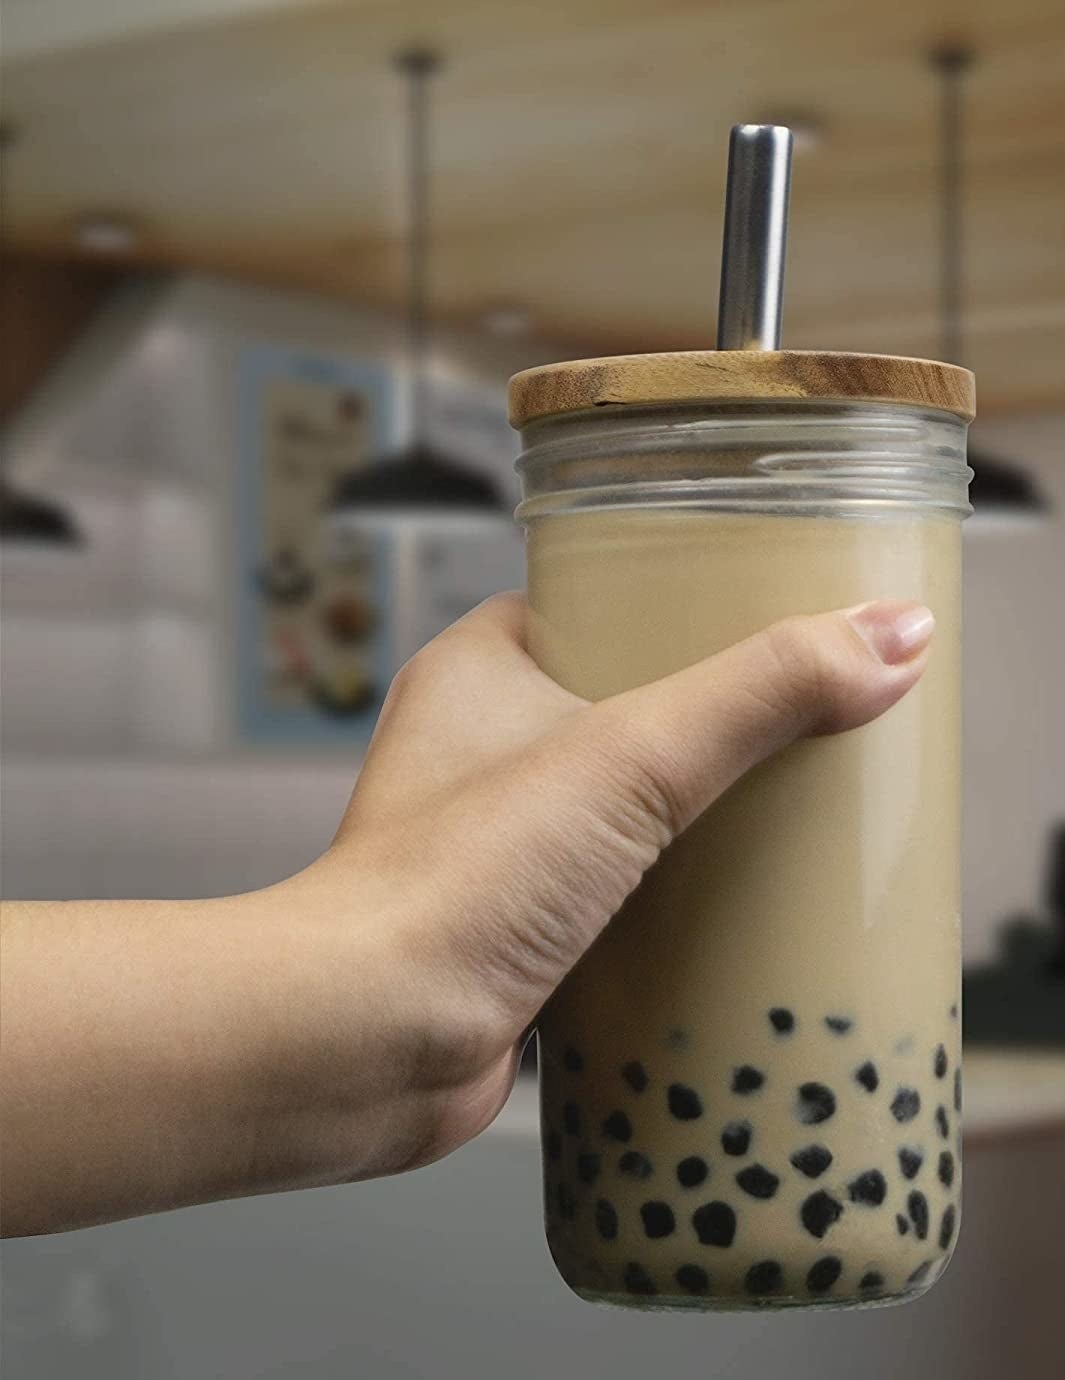 A person holding up the glass tumbler with bubble tea in it